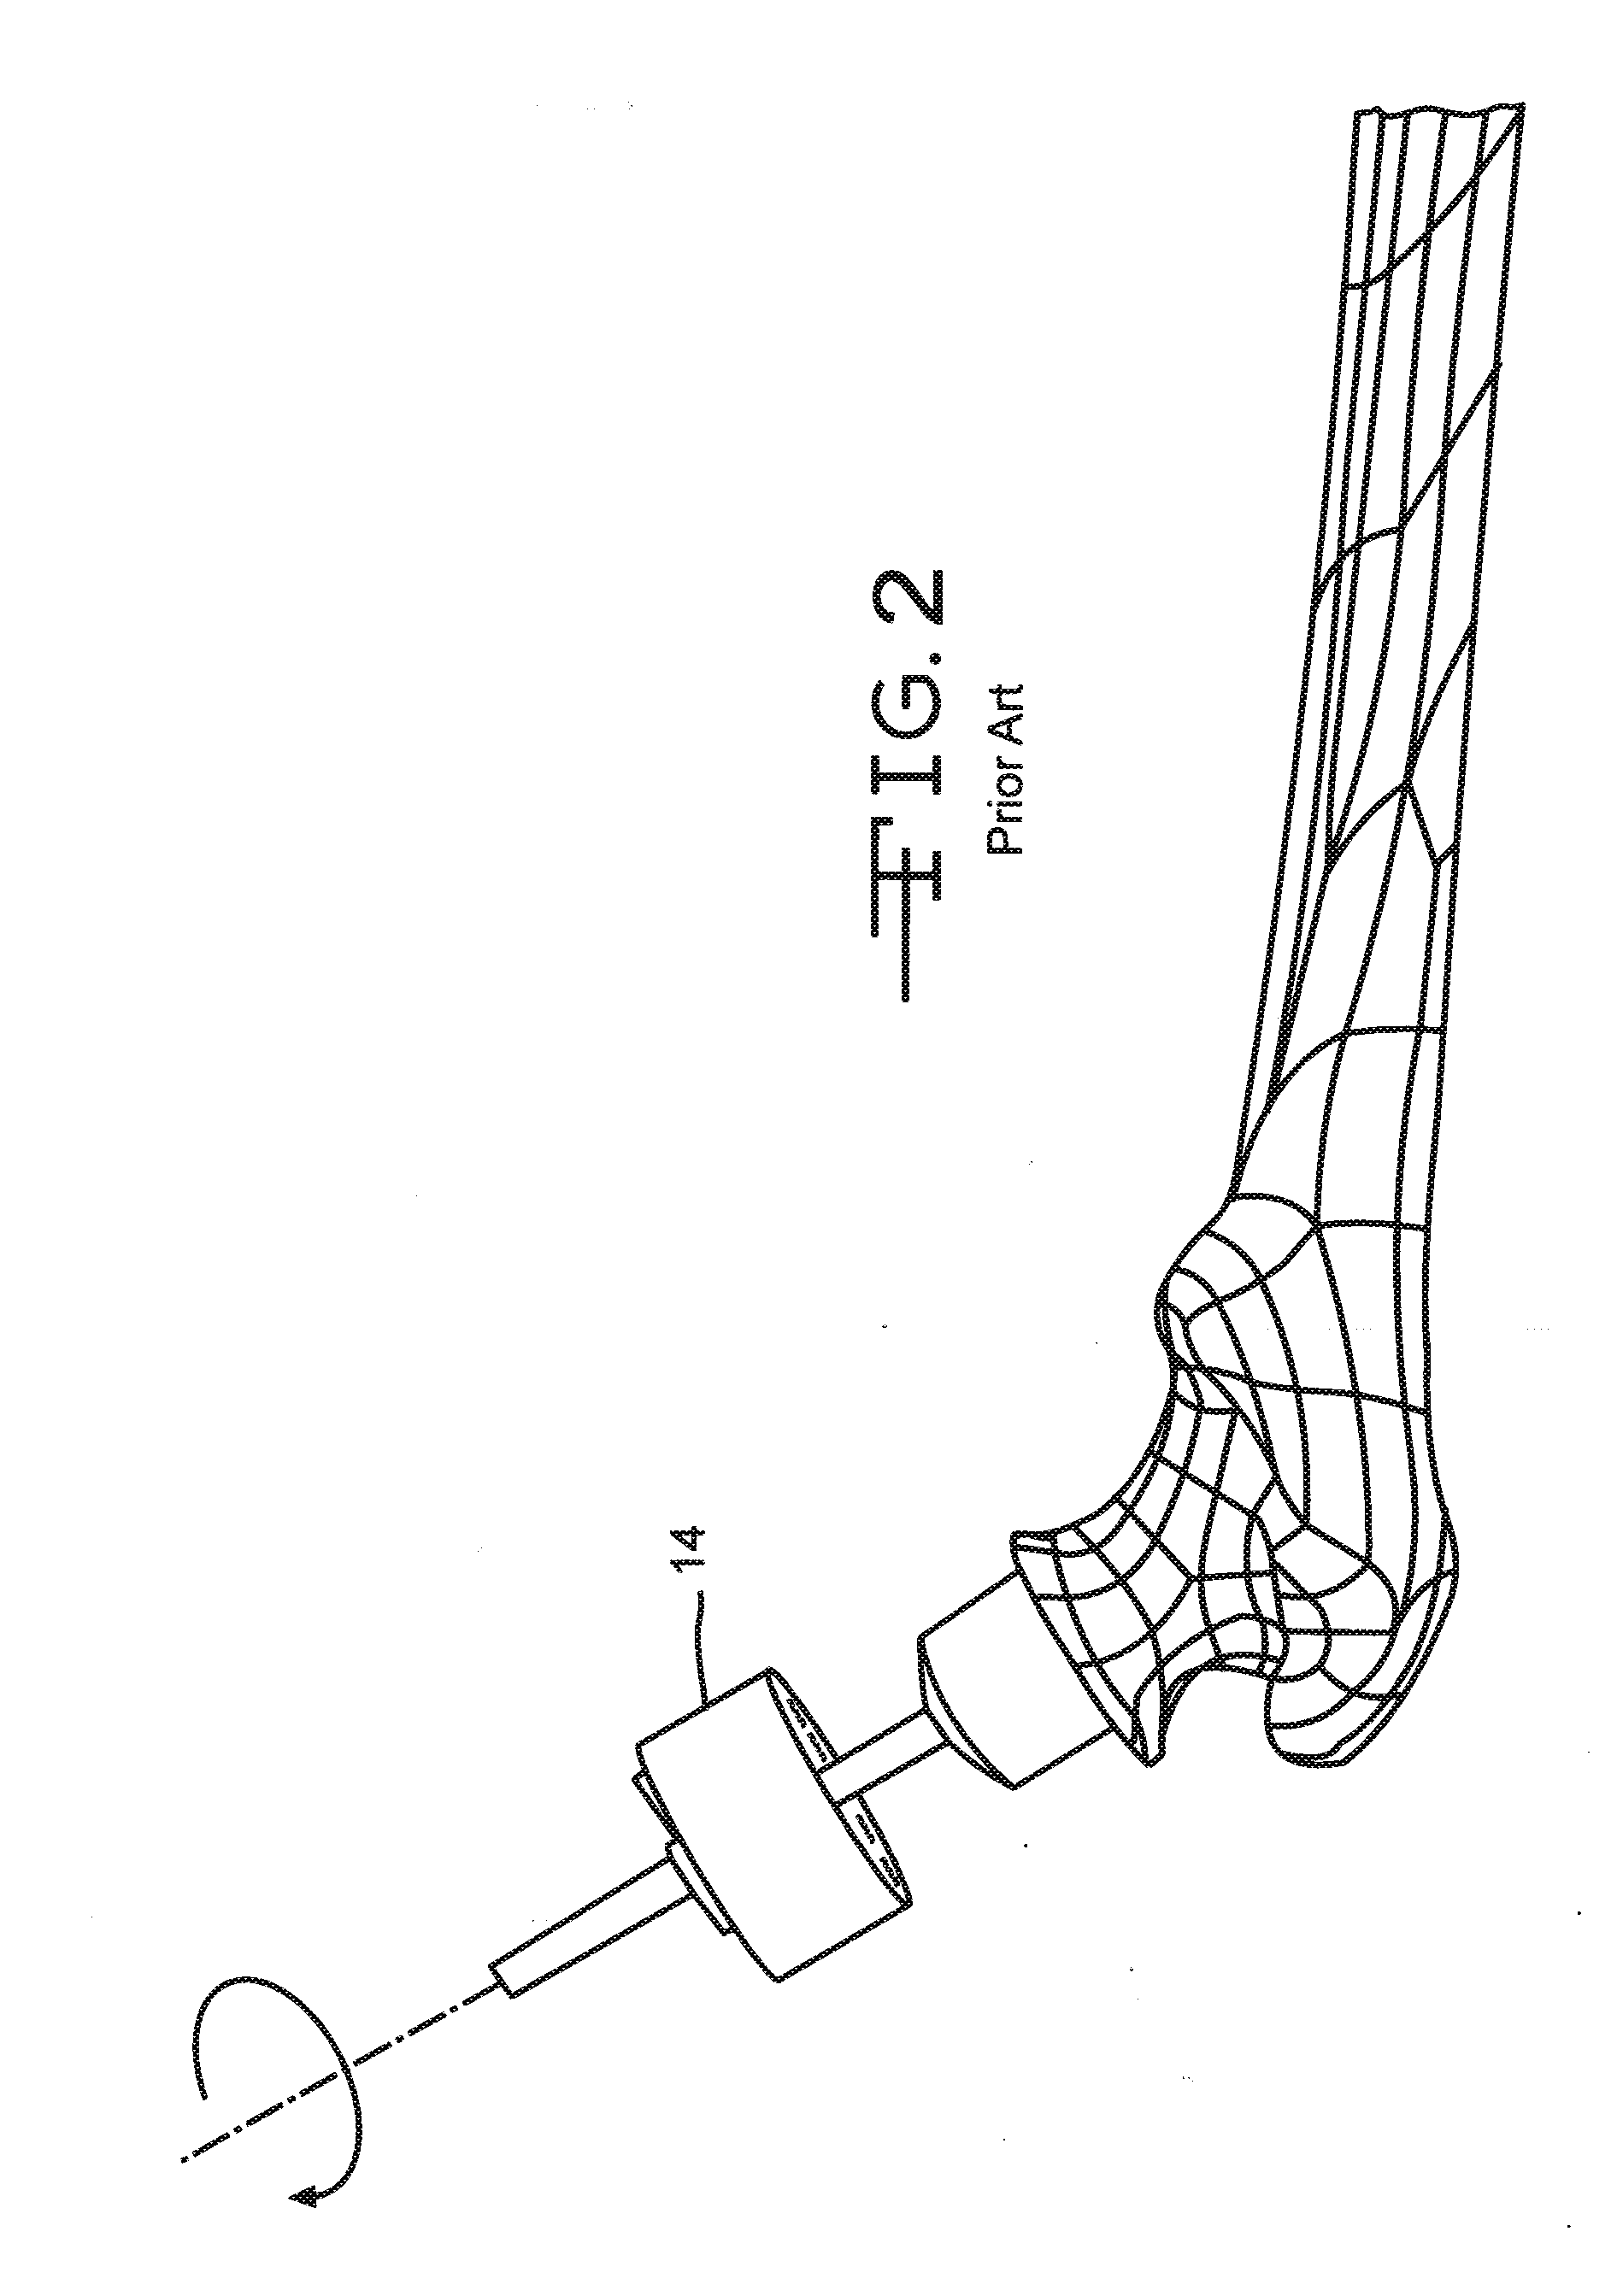 Instrument for reshaping the head of a femur